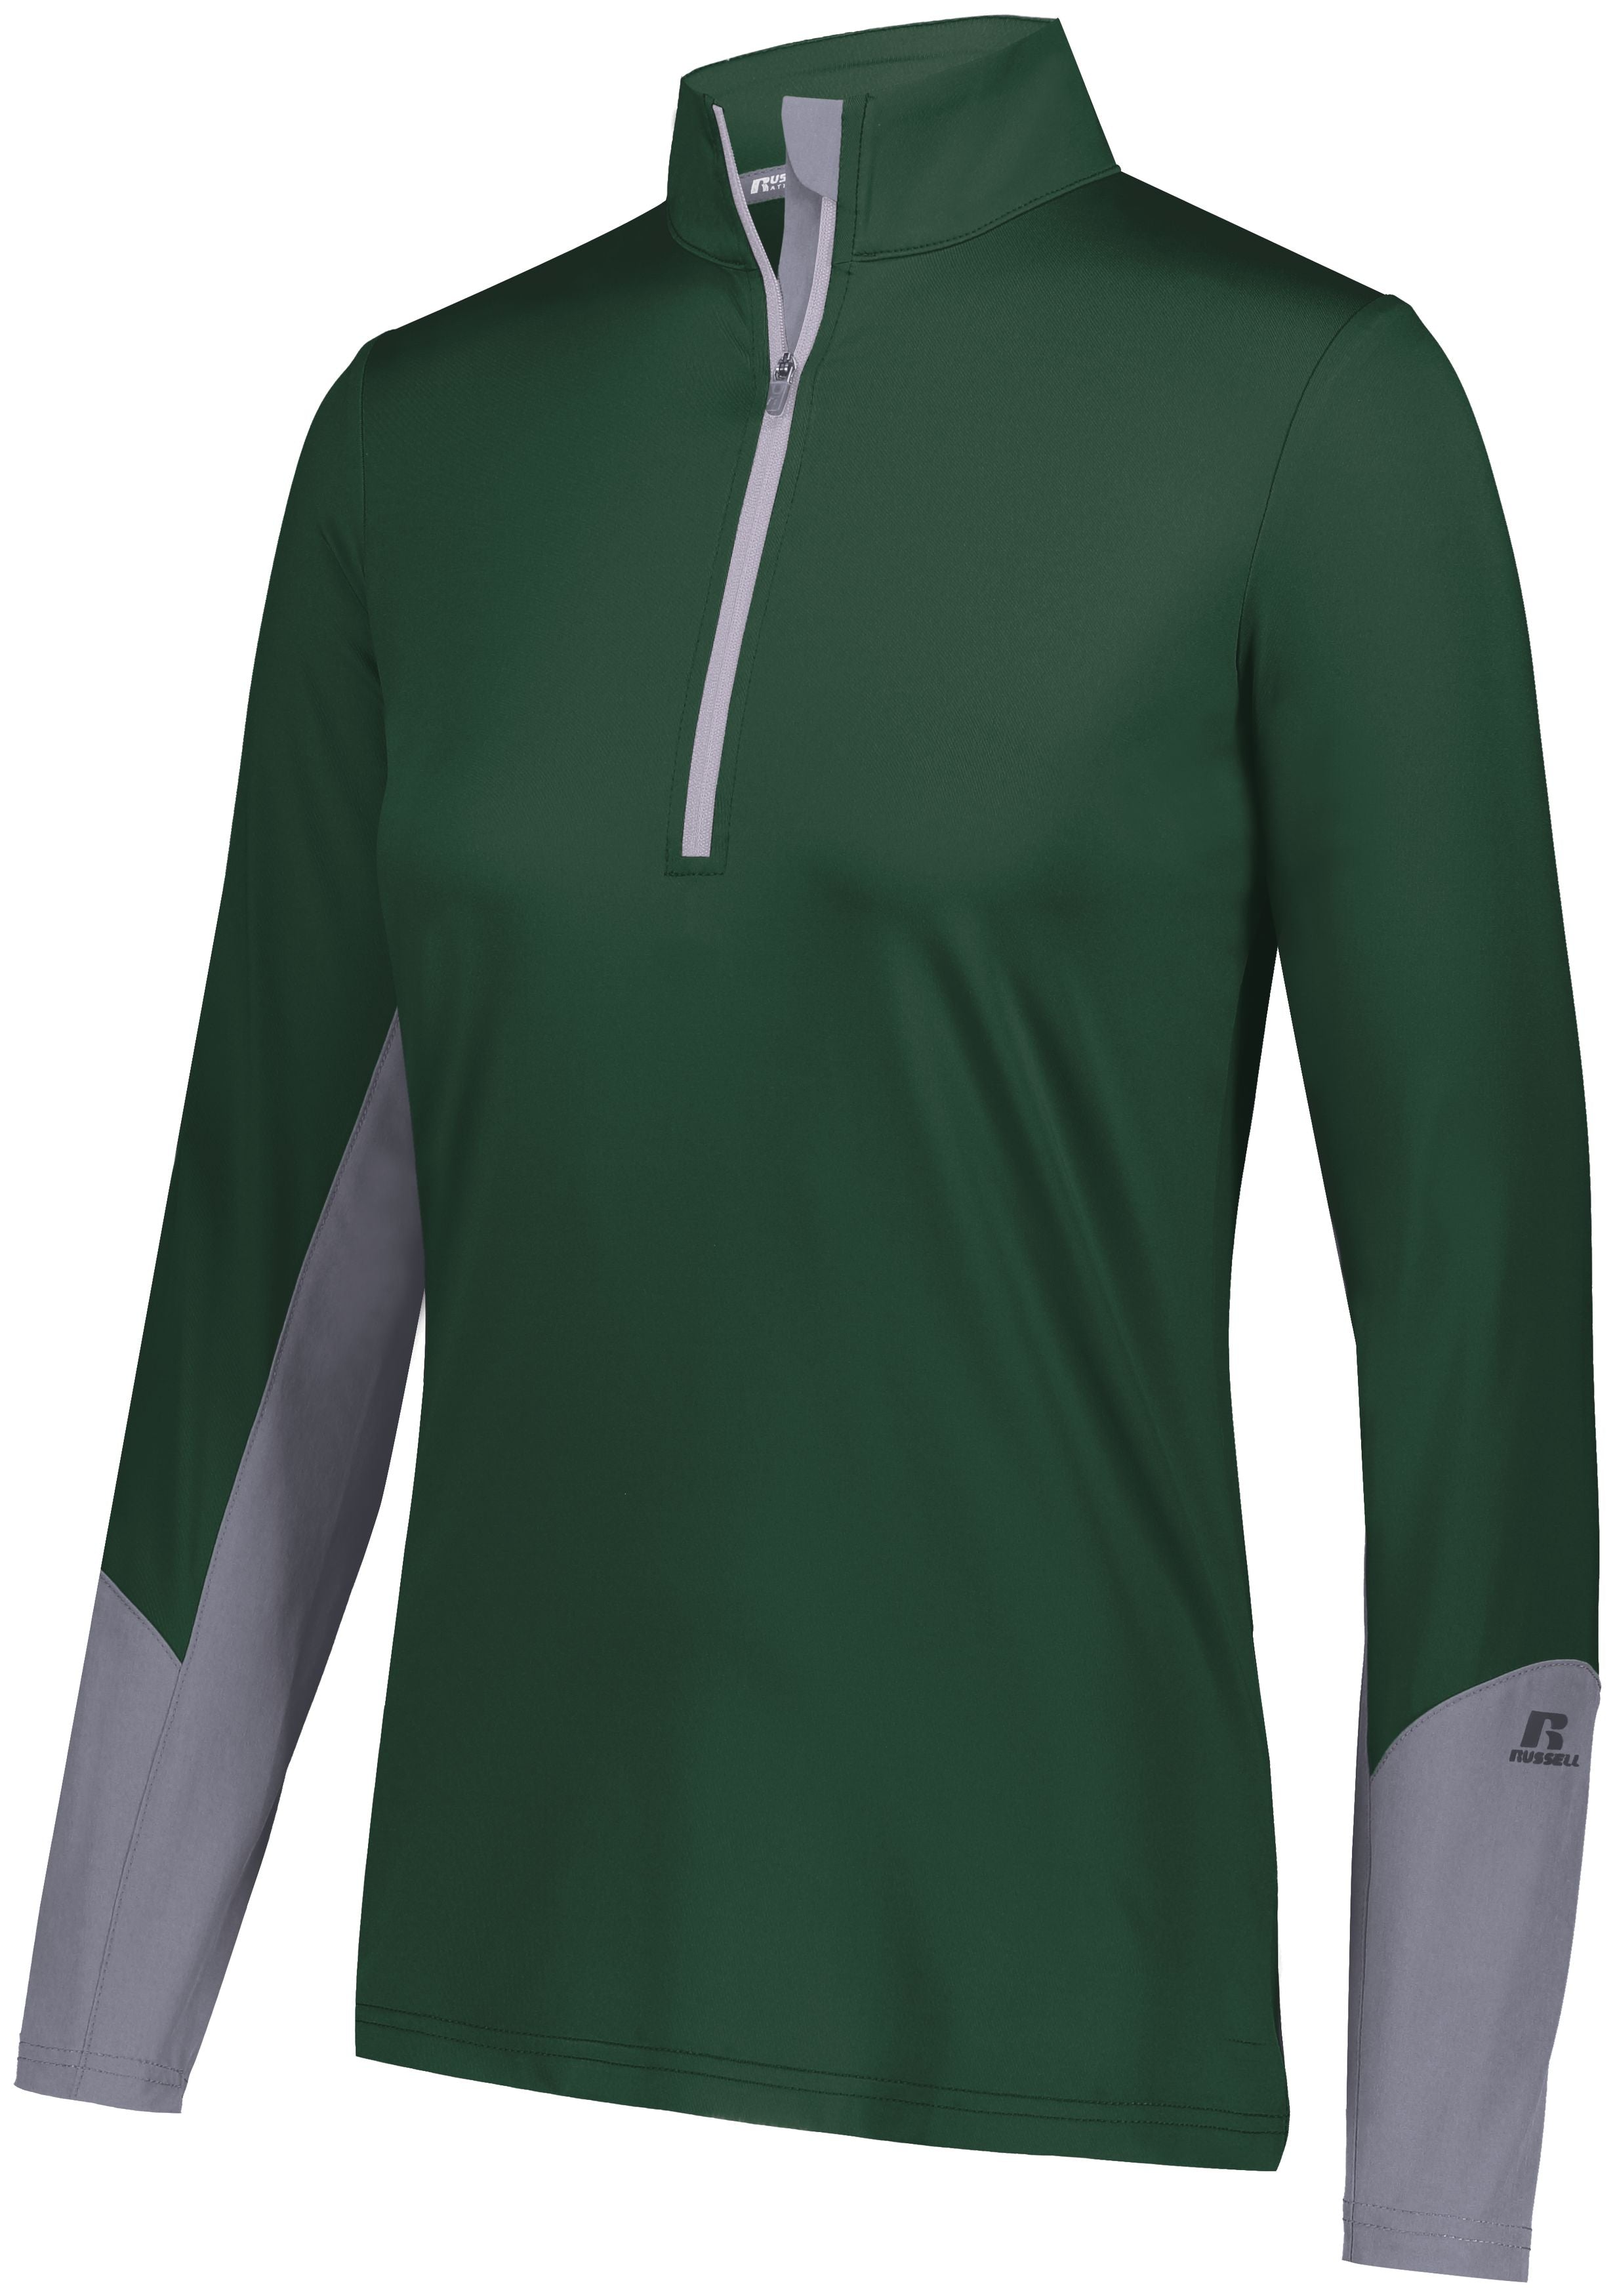 Russell Athletic Ladies Hybrid Pullover in Dark Green/Steel  -Part of the Ladies, Russell-Athletic-Products, Shirts product lines at KanaleyCreations.com